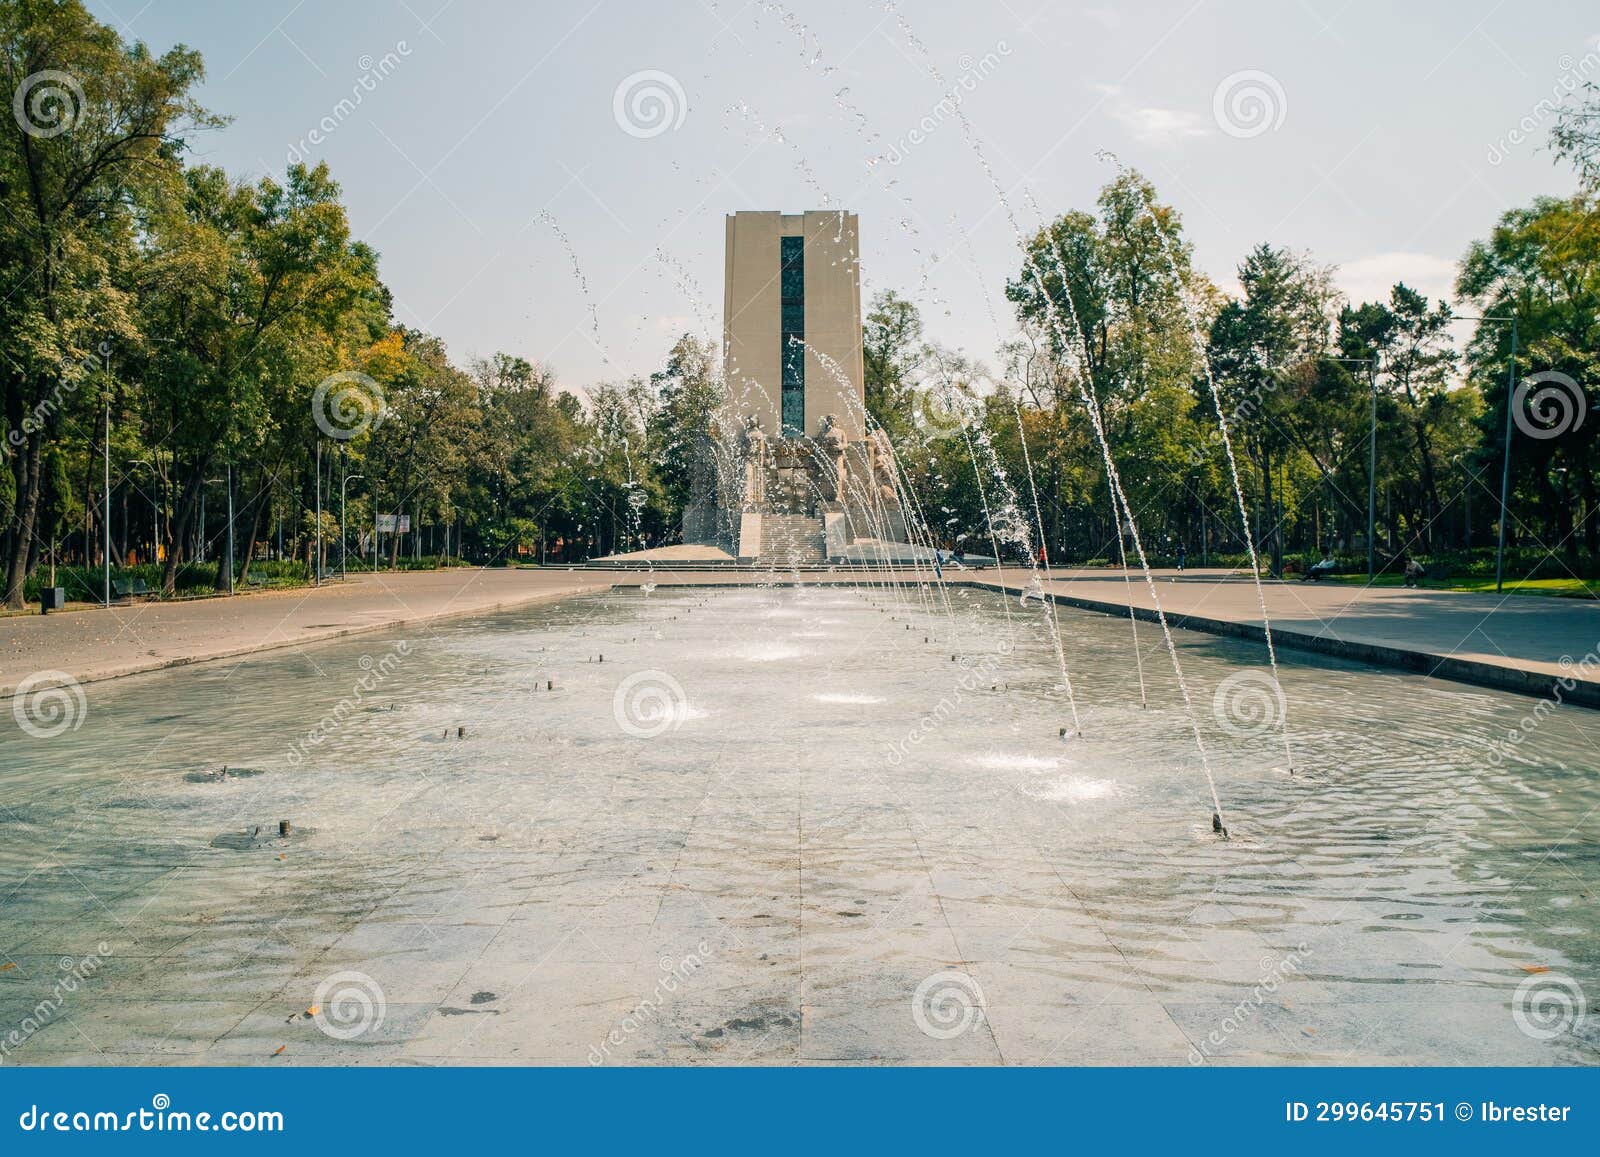 mexico city, mexico - march 3, 2023 front view of the monument to alvaro obregon and fountain